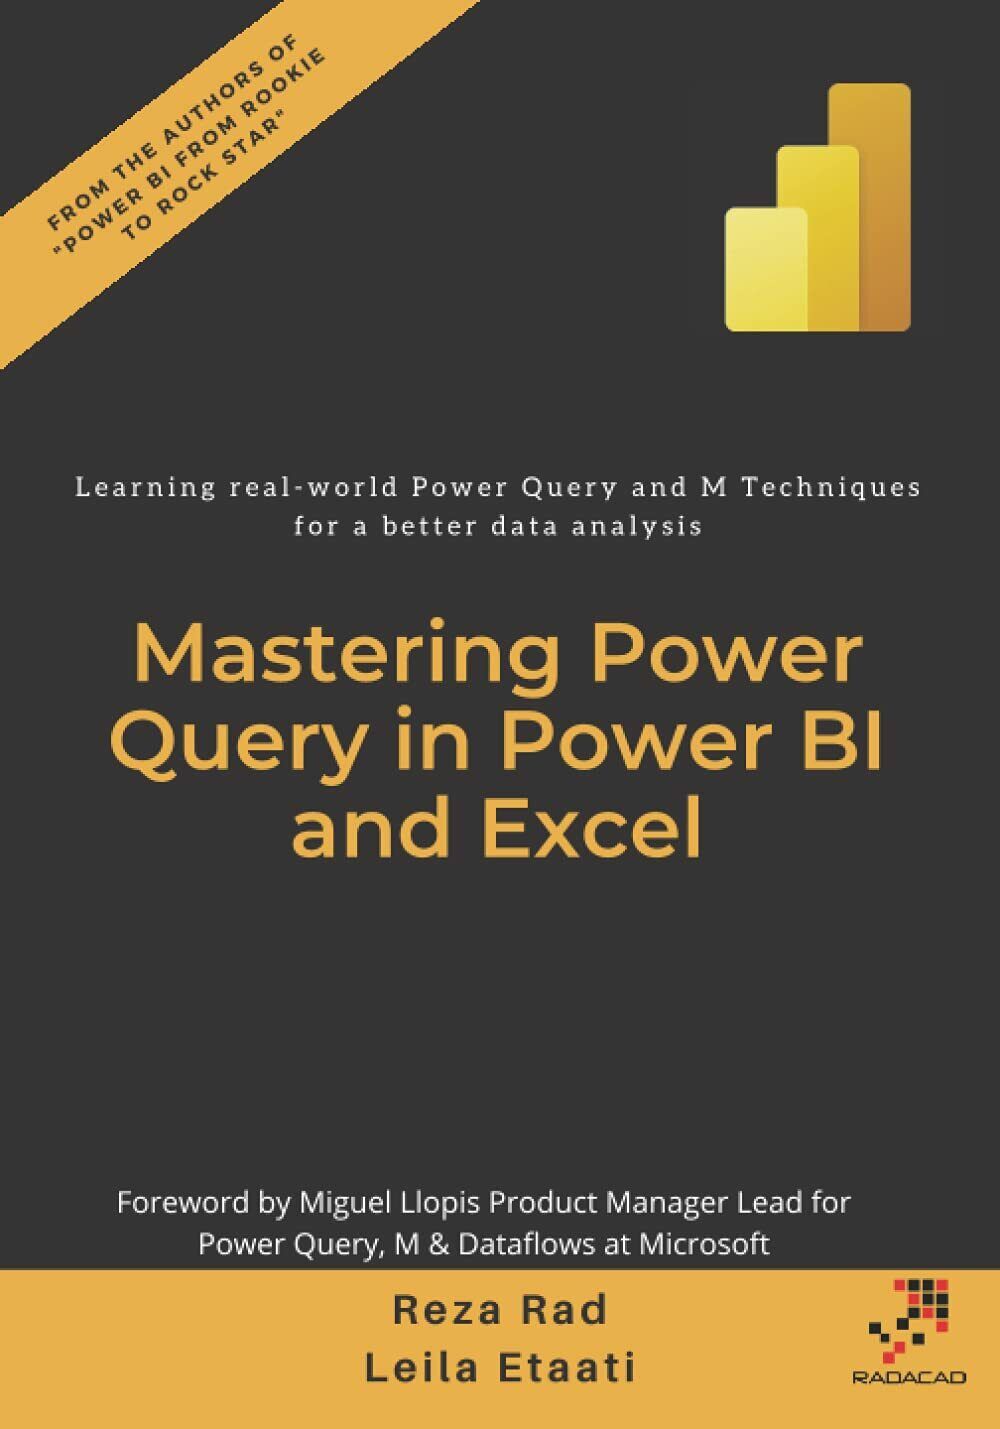 Mastering Power Query in Power BI and Excel: Learning real-world Power Query and libro usato